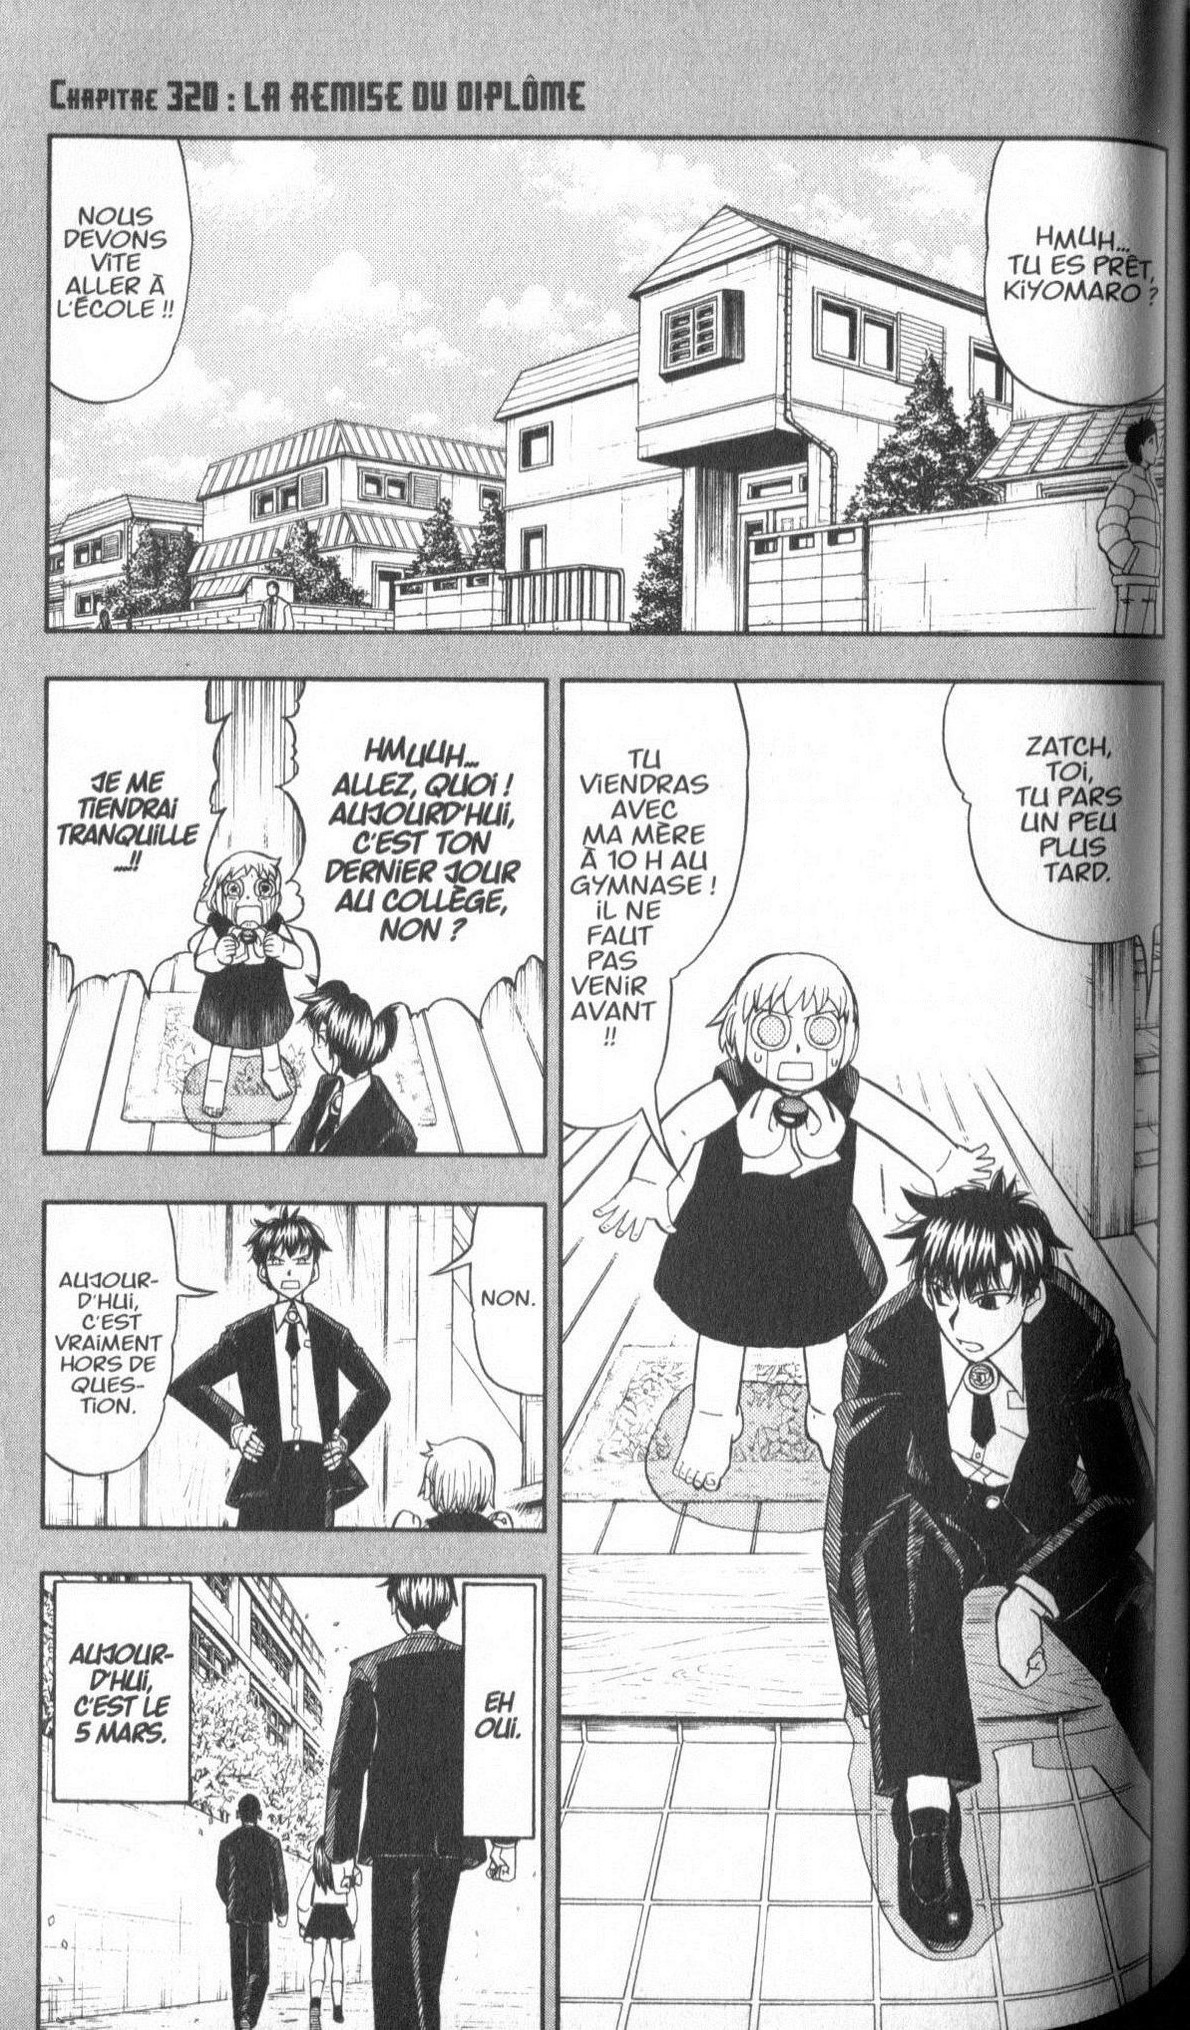 Zatch Bell: Chapter 320 - Page 1